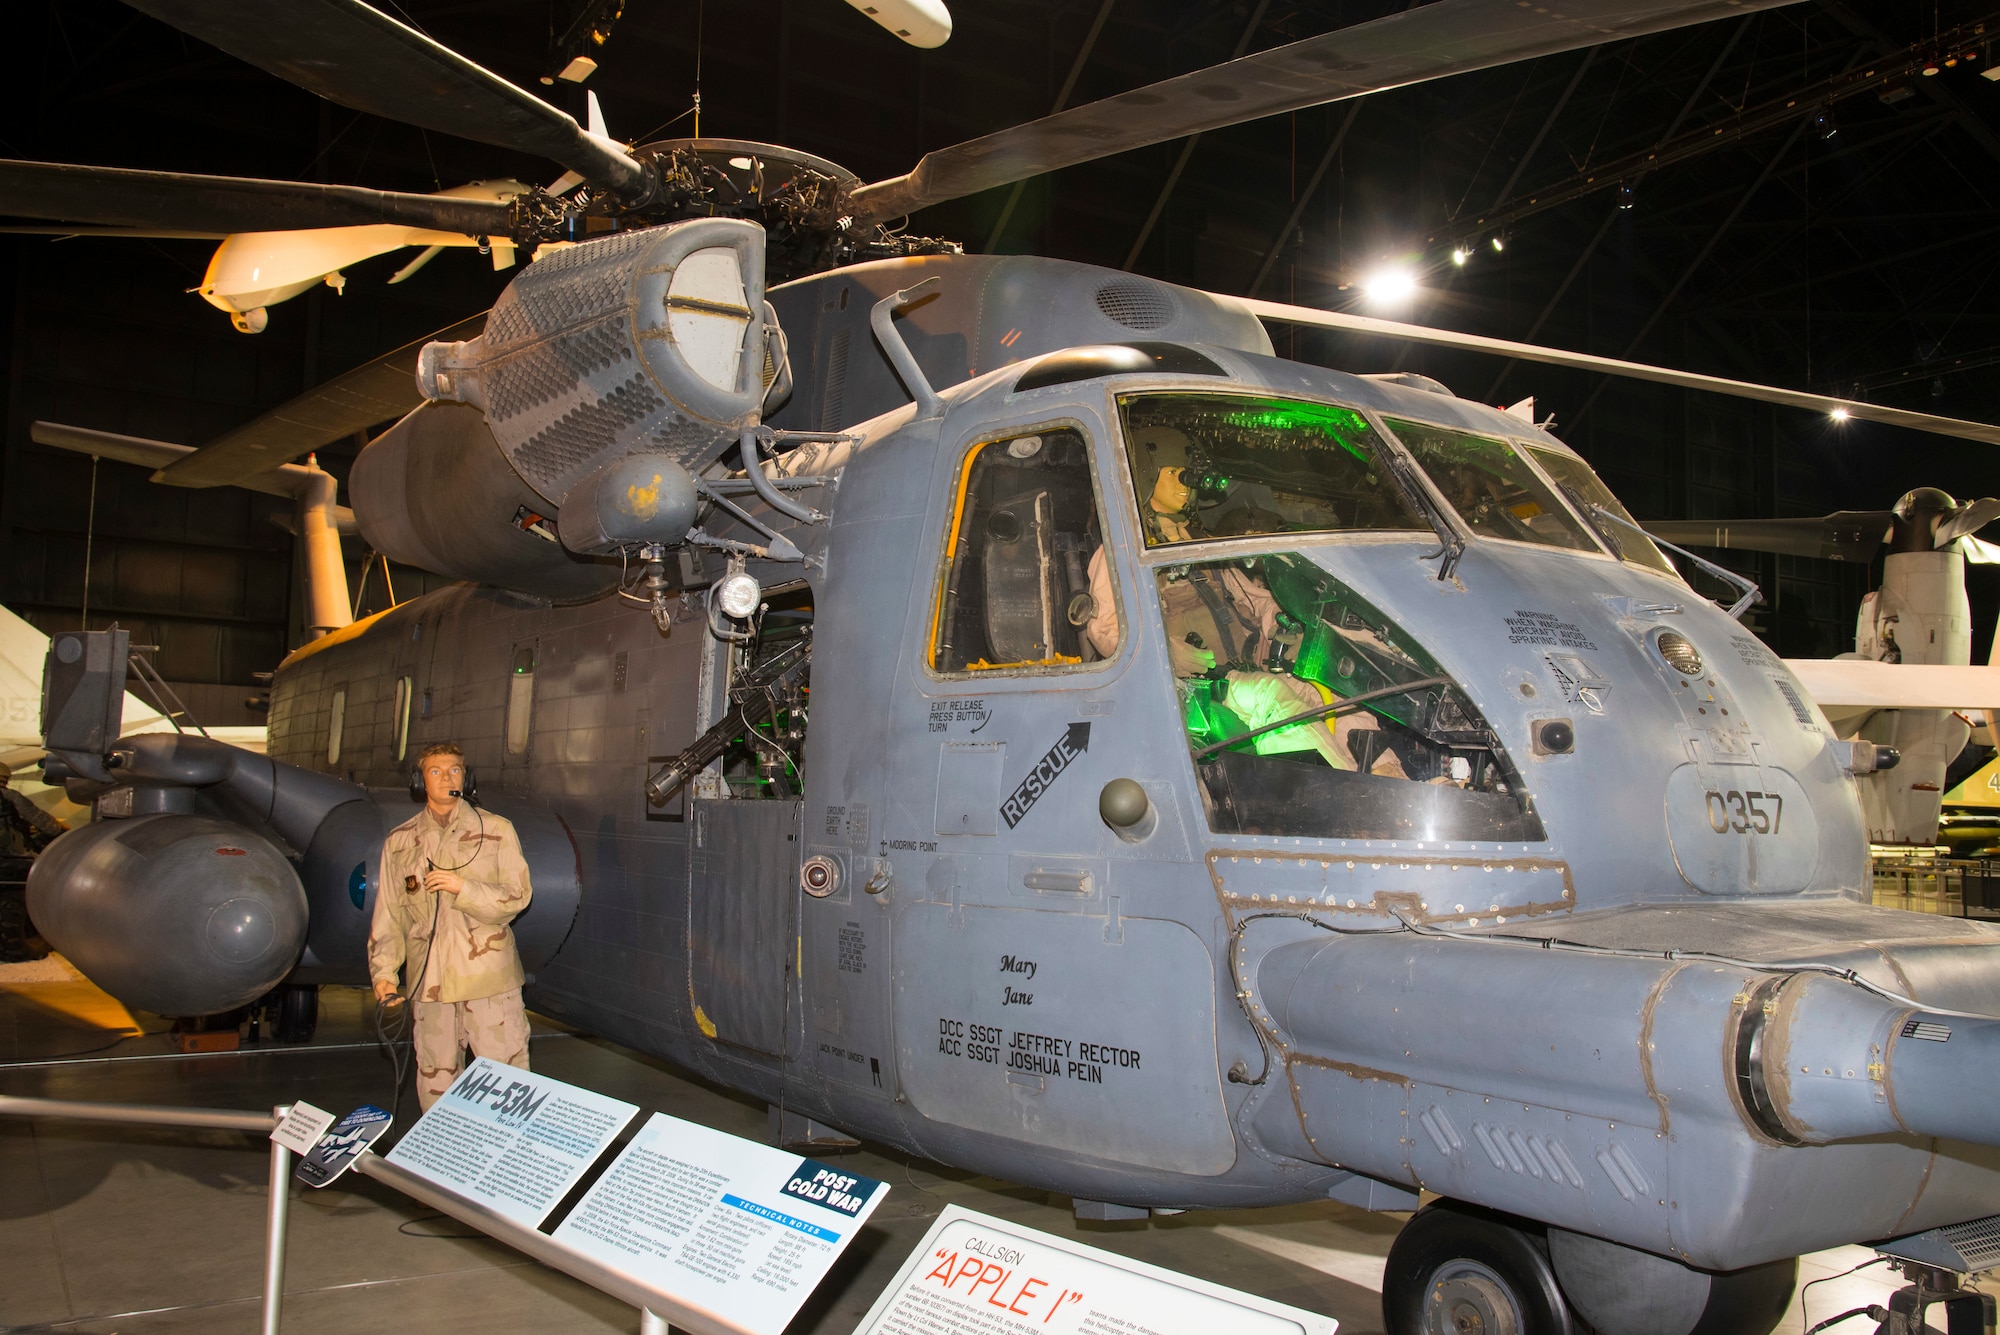 Sikorsky MH-53M Pave Low IV on display in the Cold War Gallery at the National Museum of the U.S. Air Force. (U.S. Air Force photo by Ken LaRock)